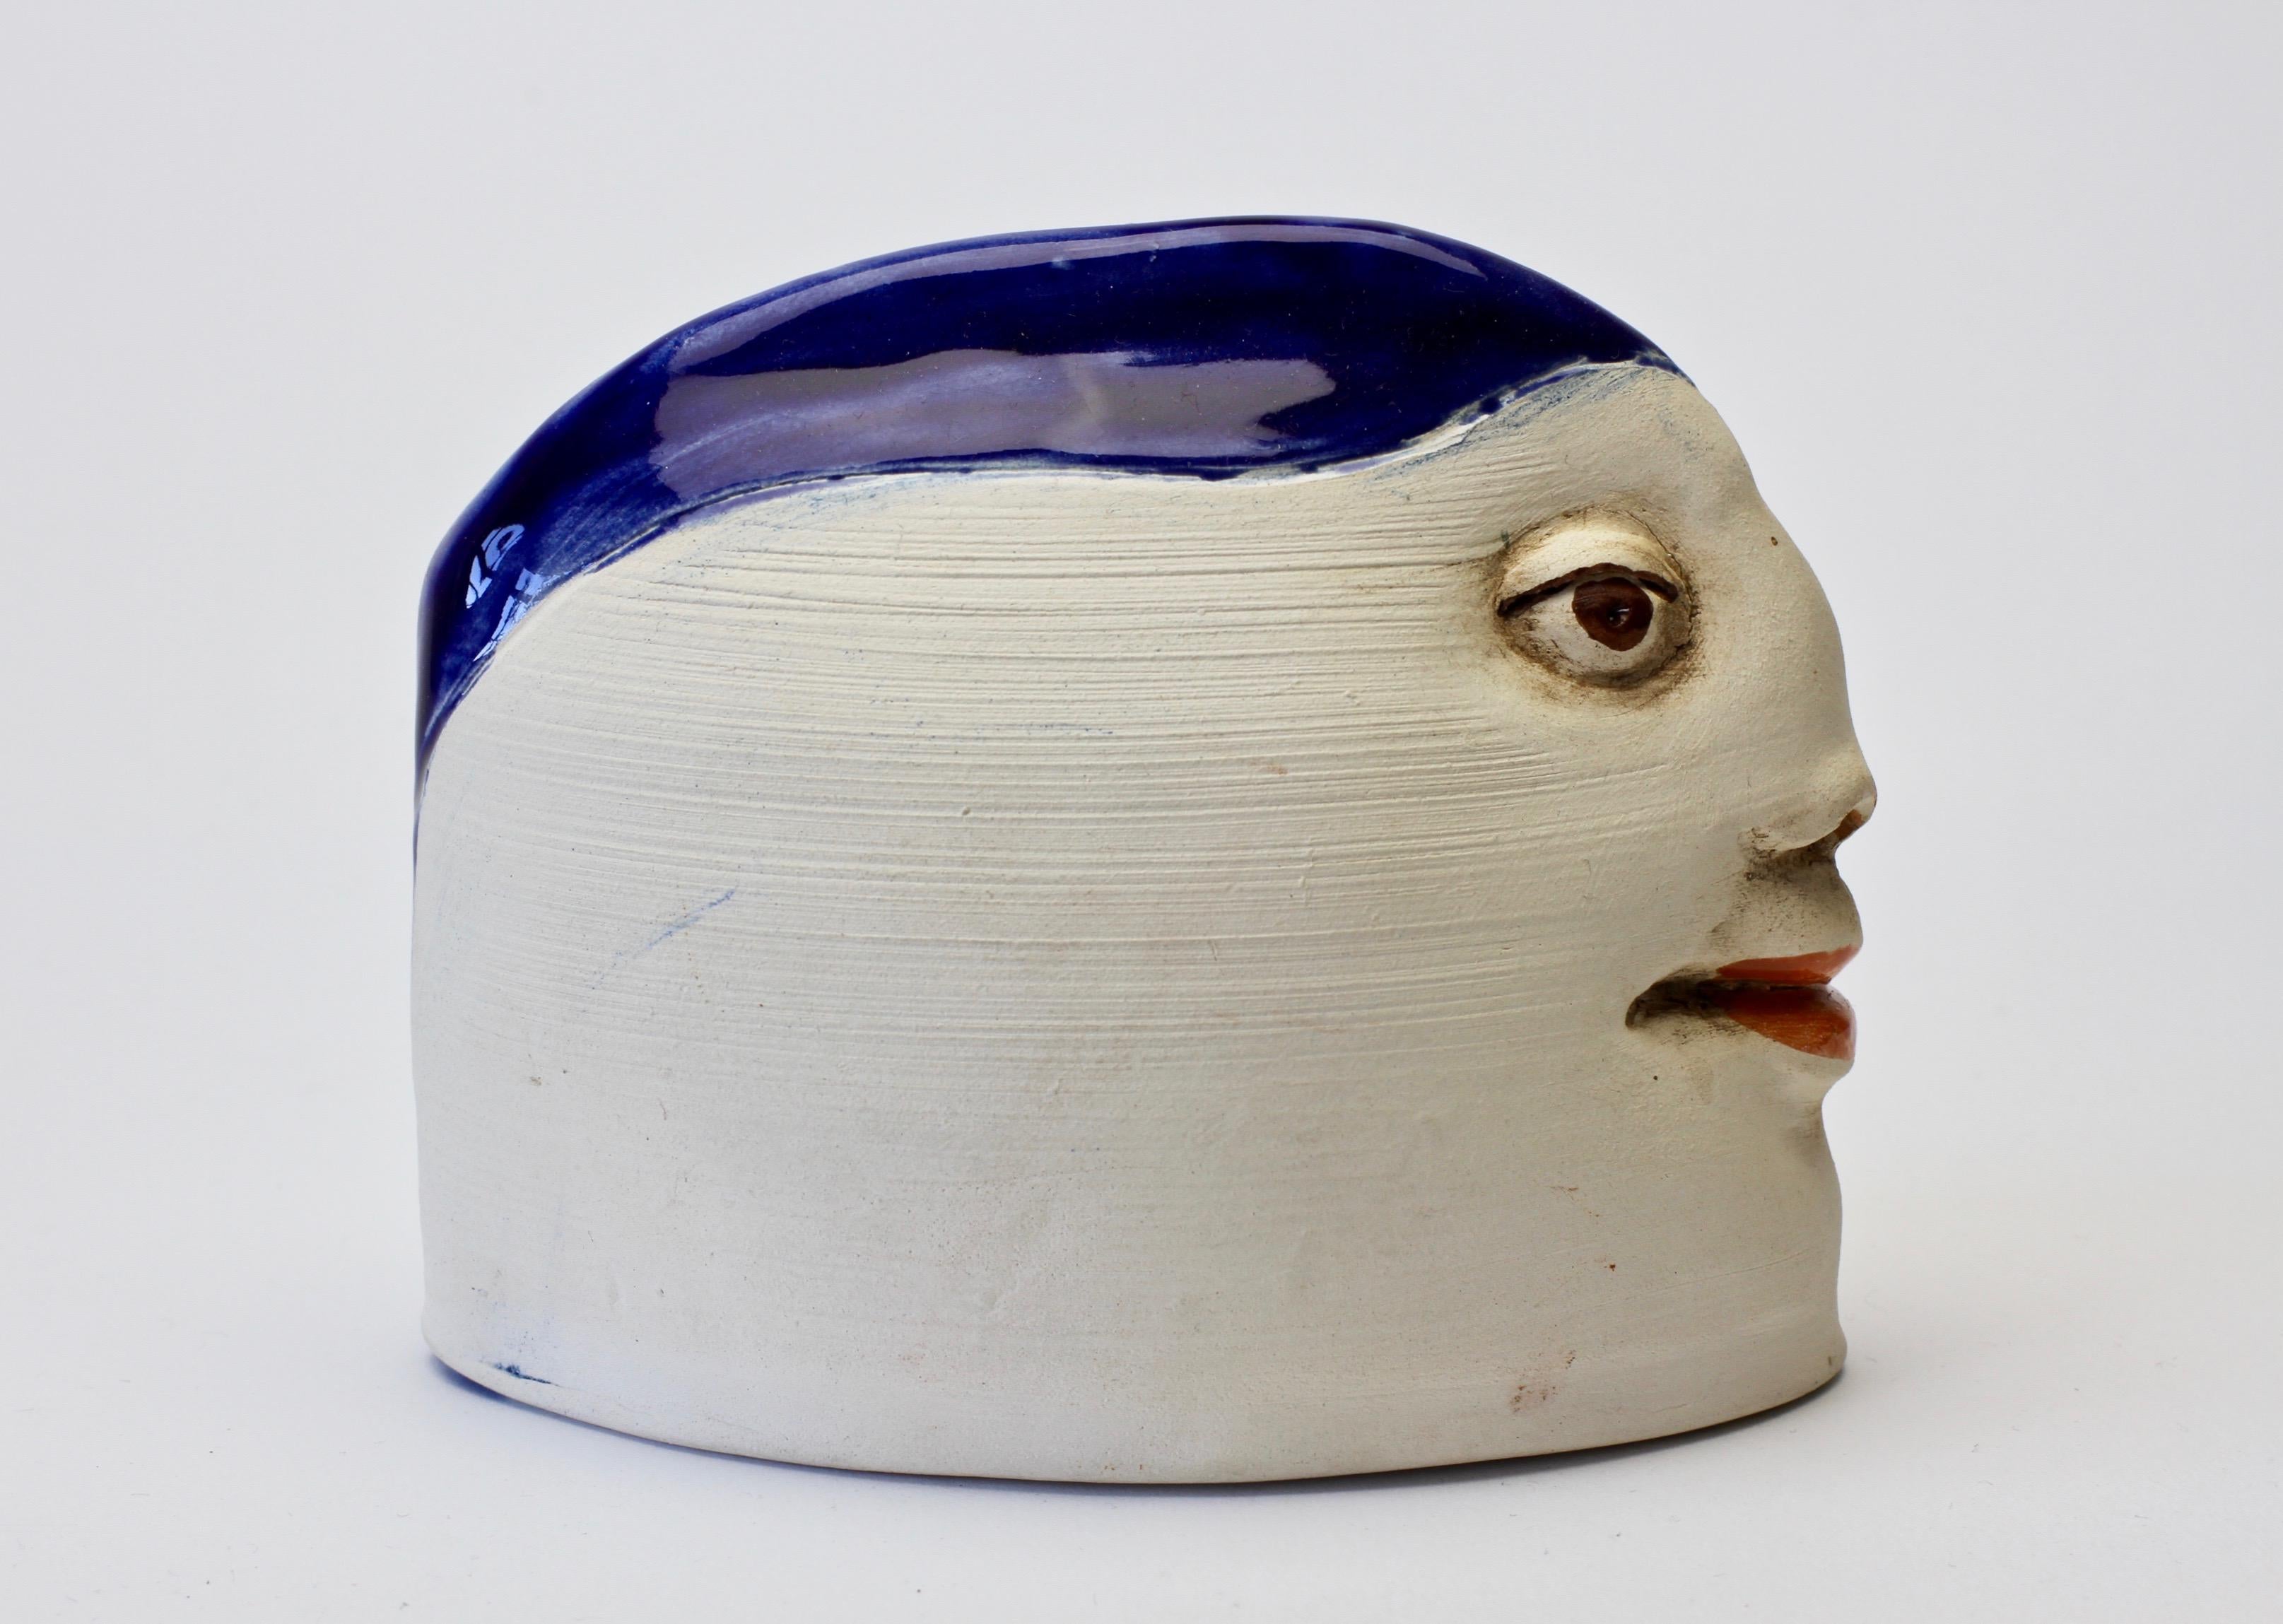 Unusual Quirky Vintage Hand Thrown Glazed Pottery Sculpture of a Head with Face  (Moderne der Mitte des Jahrhunderts)